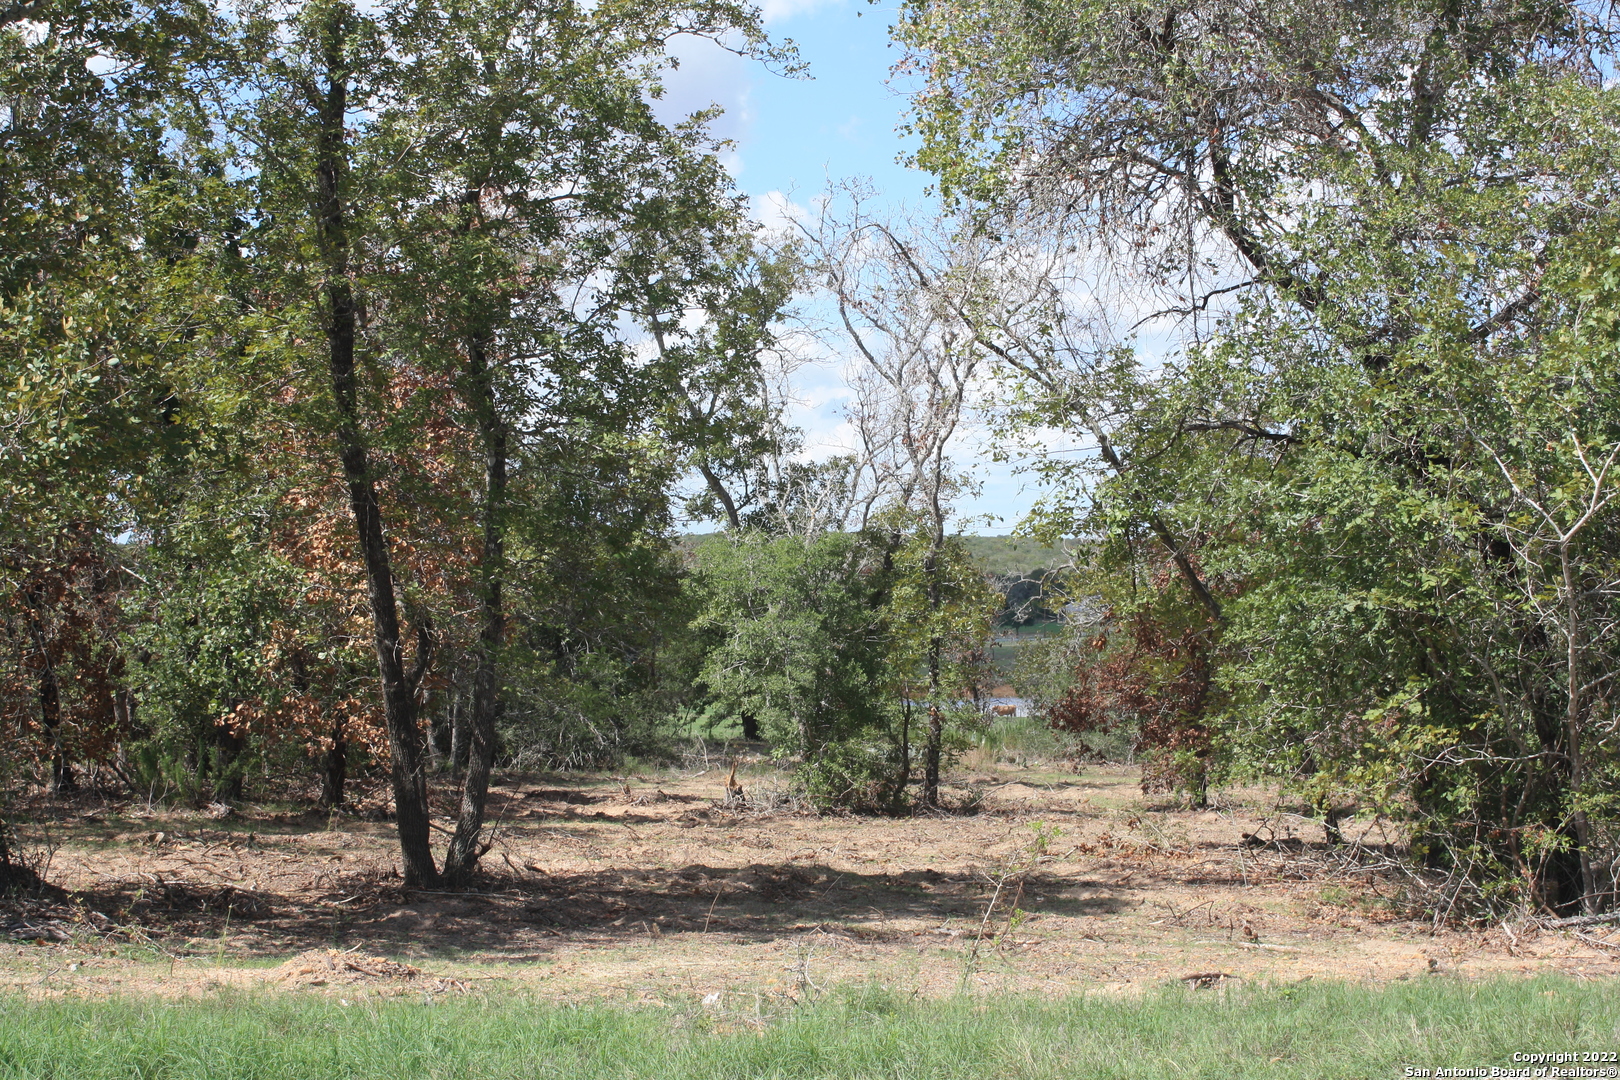 a view of dirt yard with a large tree